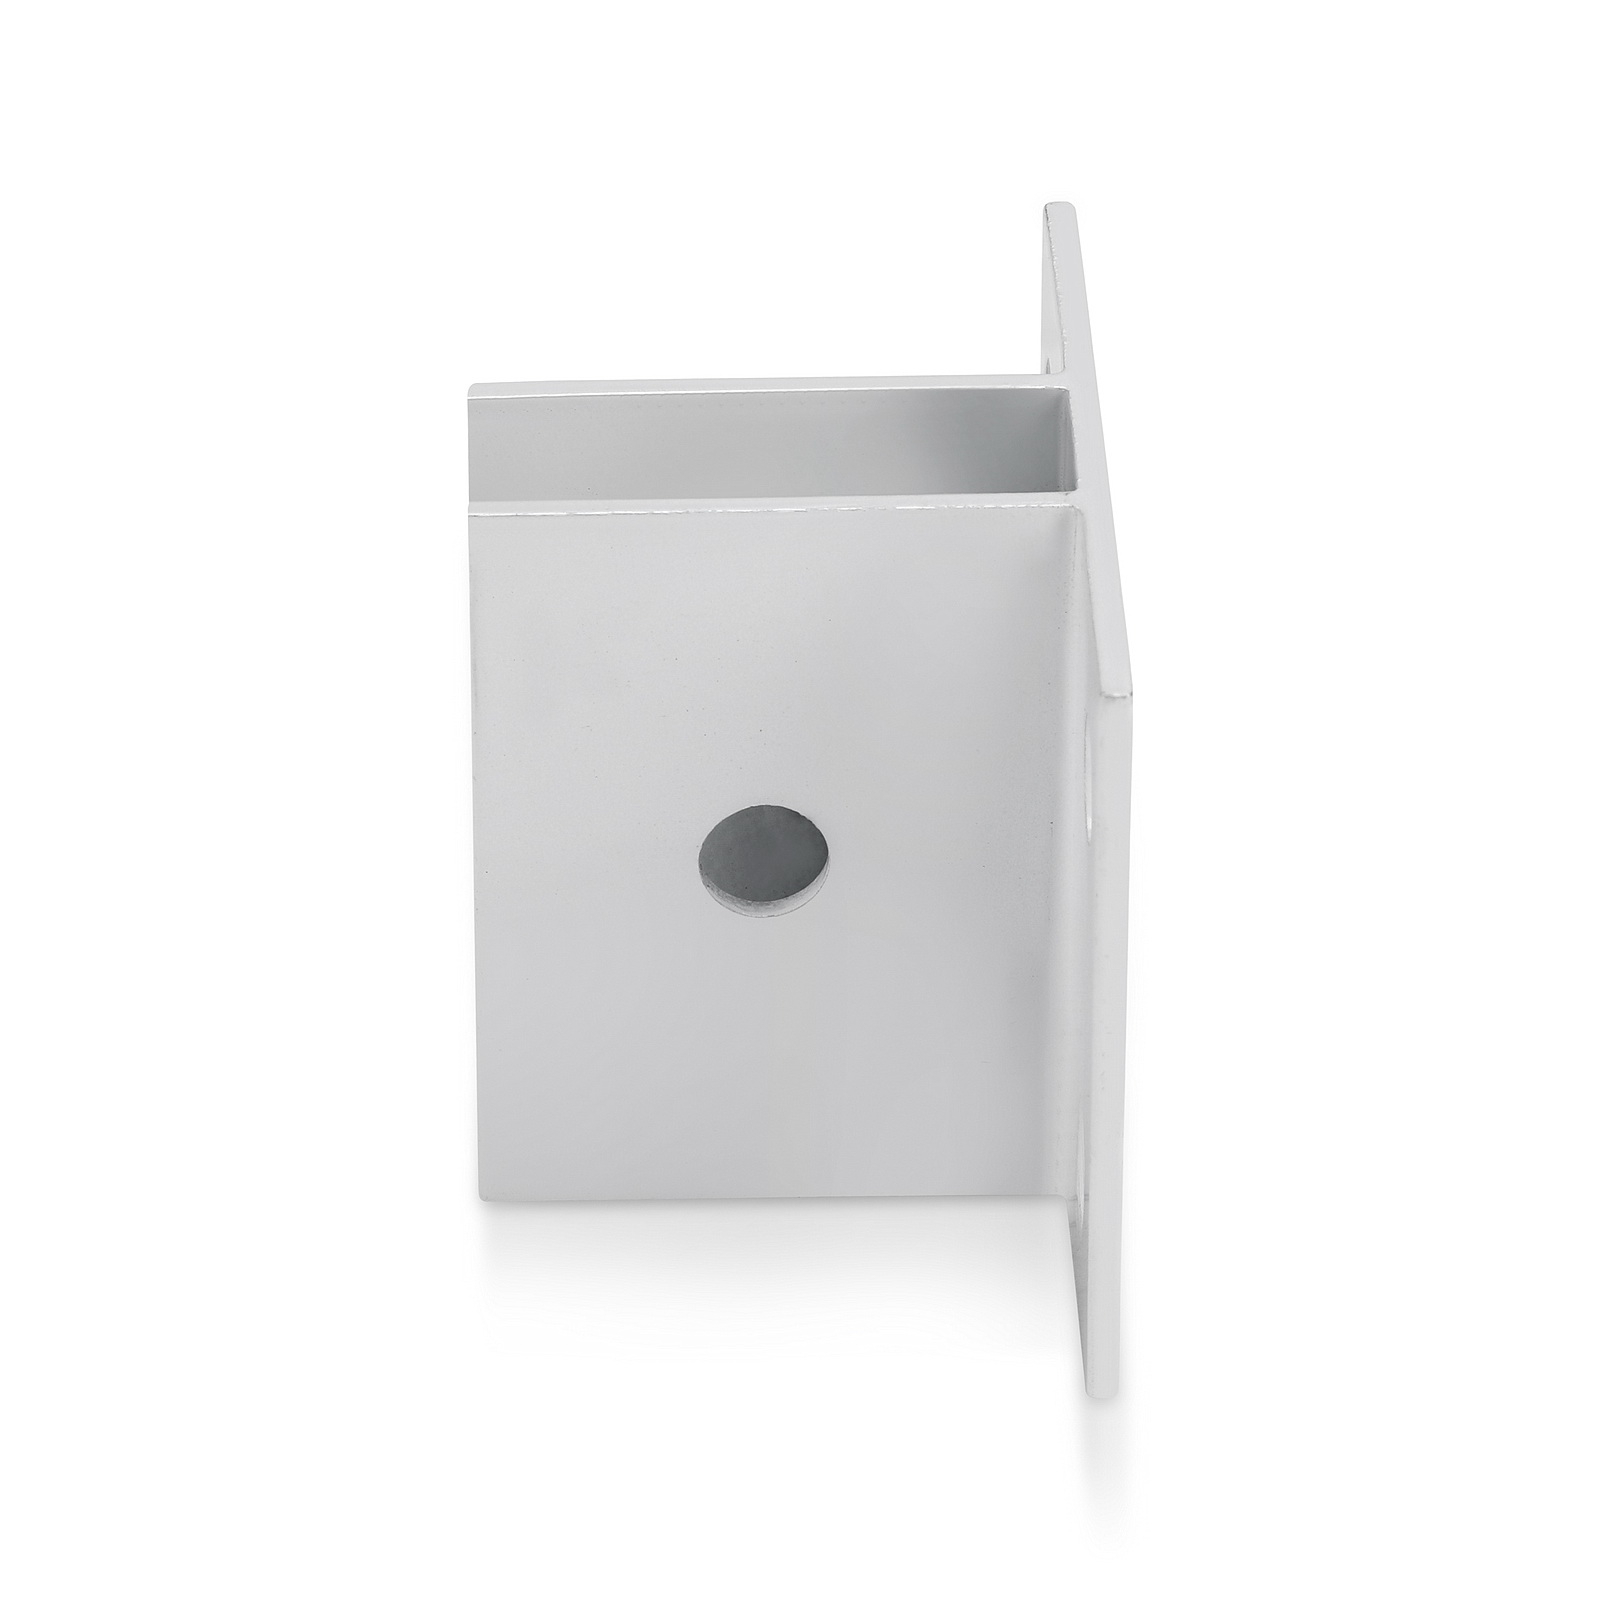 Sooper Center Bracket for Solid Sign Substrate Mounting - for 1/2'' Material - White Powder Coated Aluminum (1 ea.)